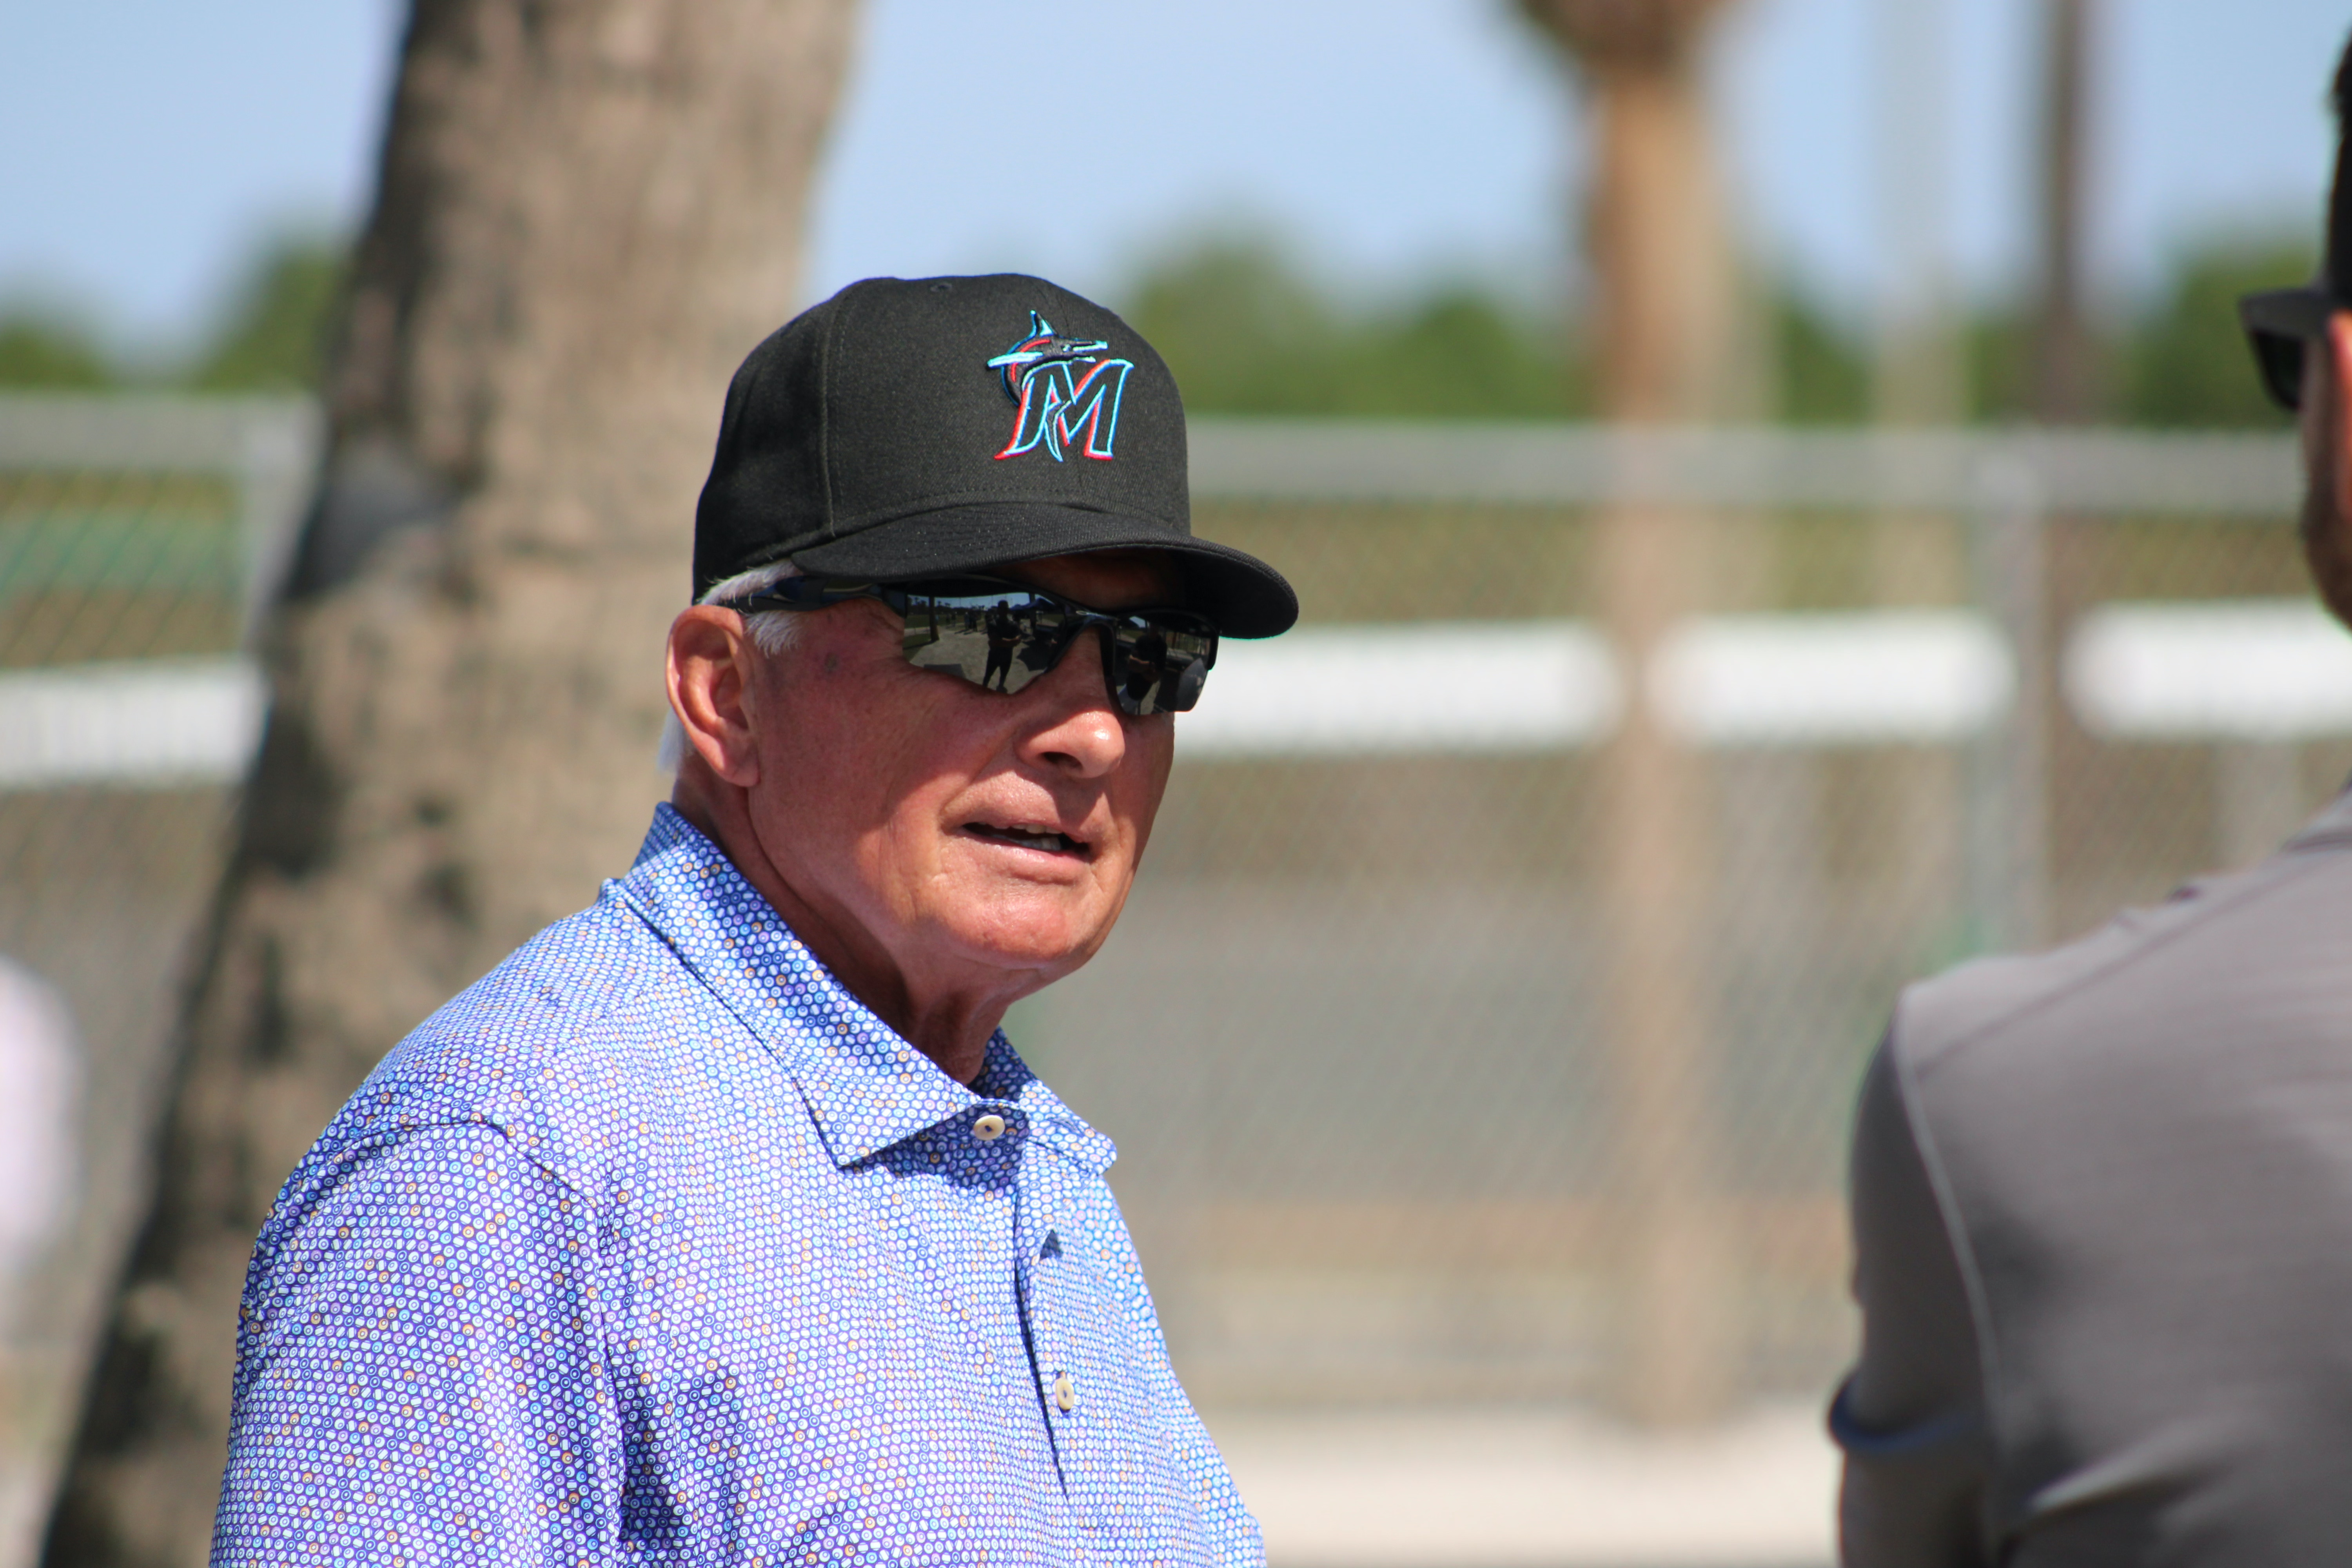 Newly hired baseball advisor Terry Collins wears a Marlins hat and sunglasses while attending 2023 Spring Training at Roger Dean Chevrolet Stadium in Jupiter, FL